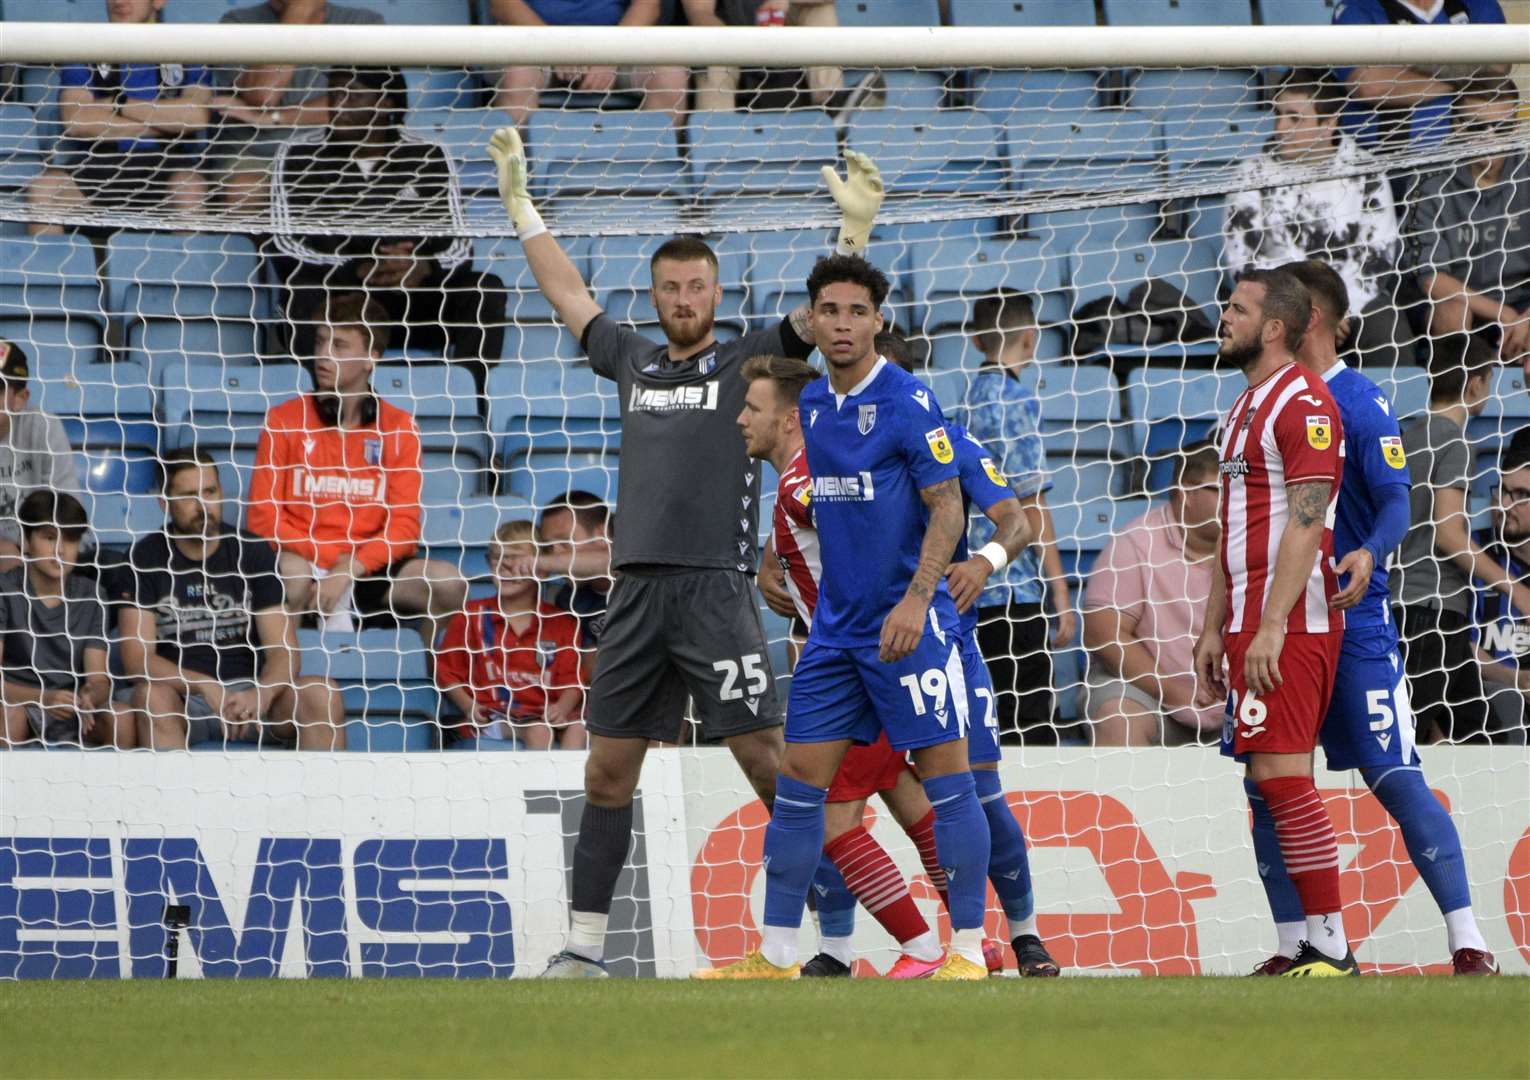 Jake Turner has been playing for the Gills in their cup games this season